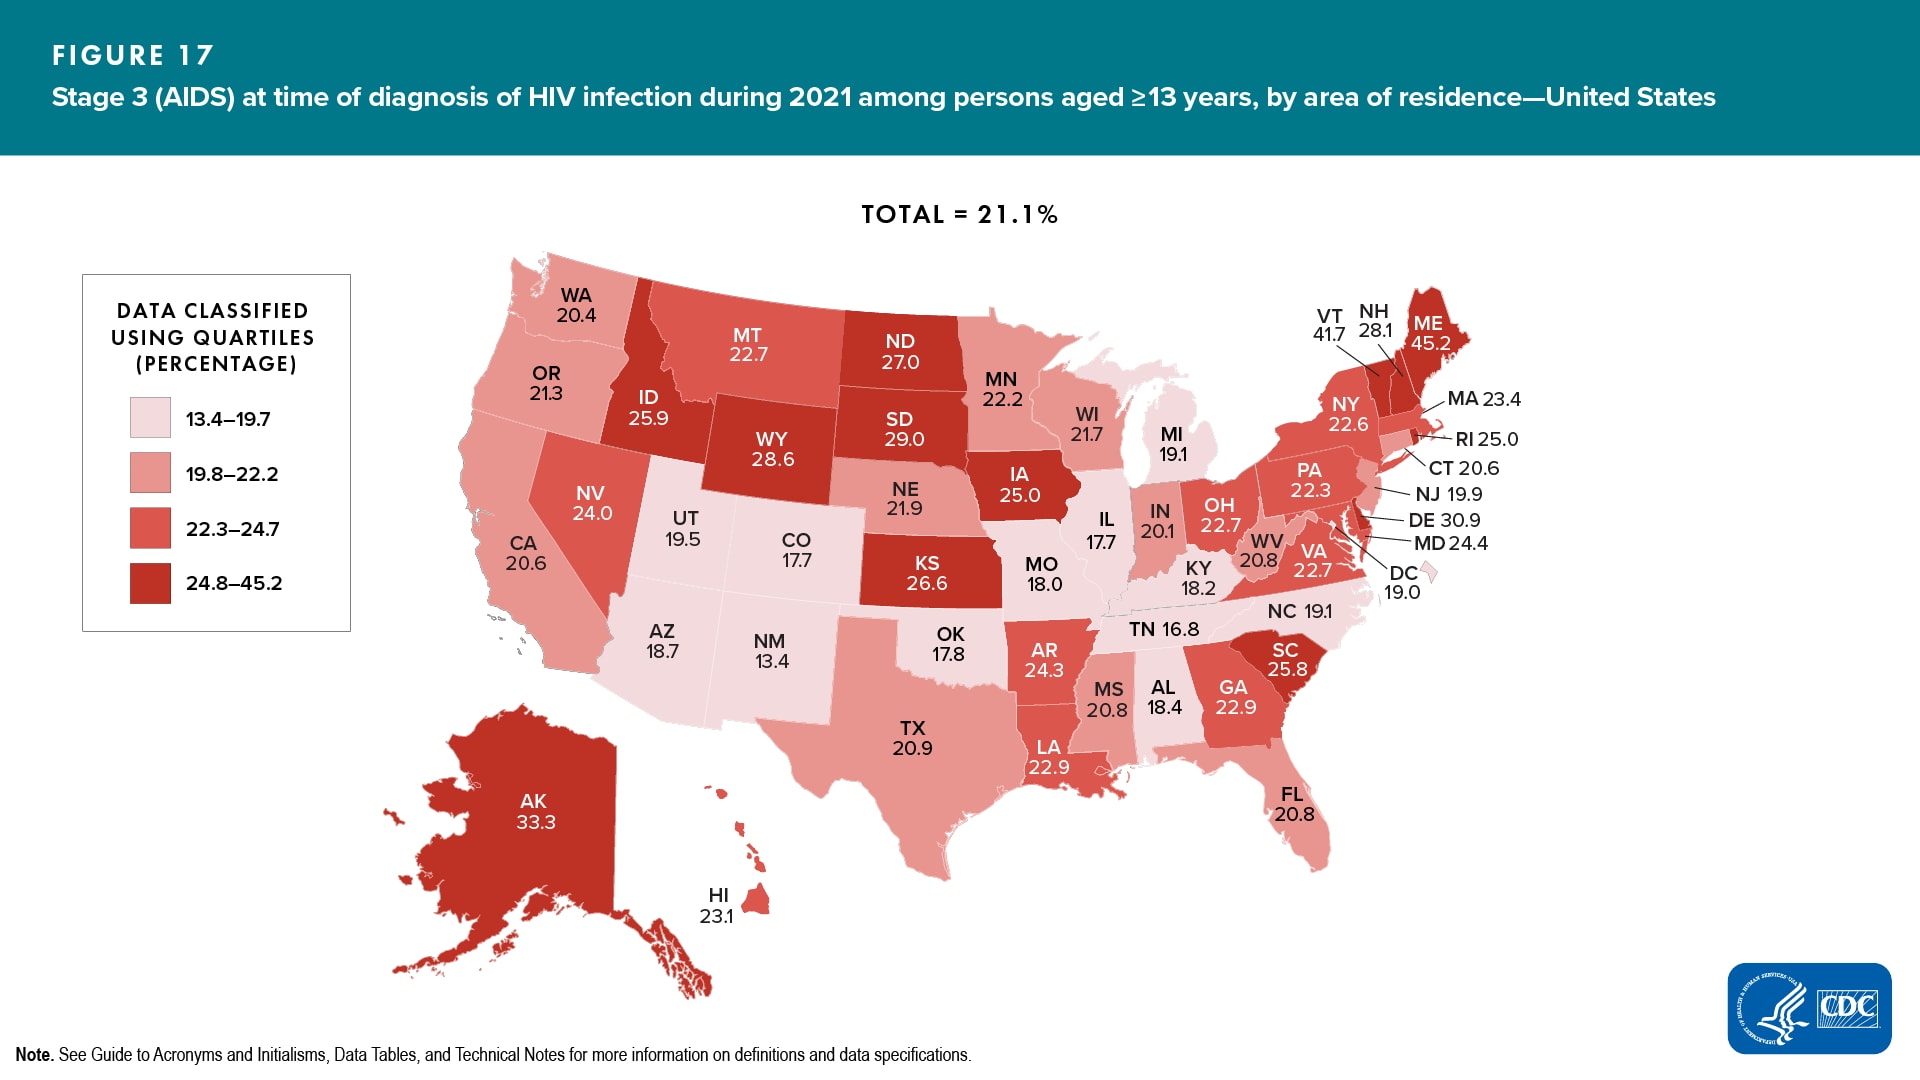 Figure 17. Stage 3 (AIDS) at time of diagnosis of HIV infection during 2021 among persons aged ≥13 years, by area of residence — United States